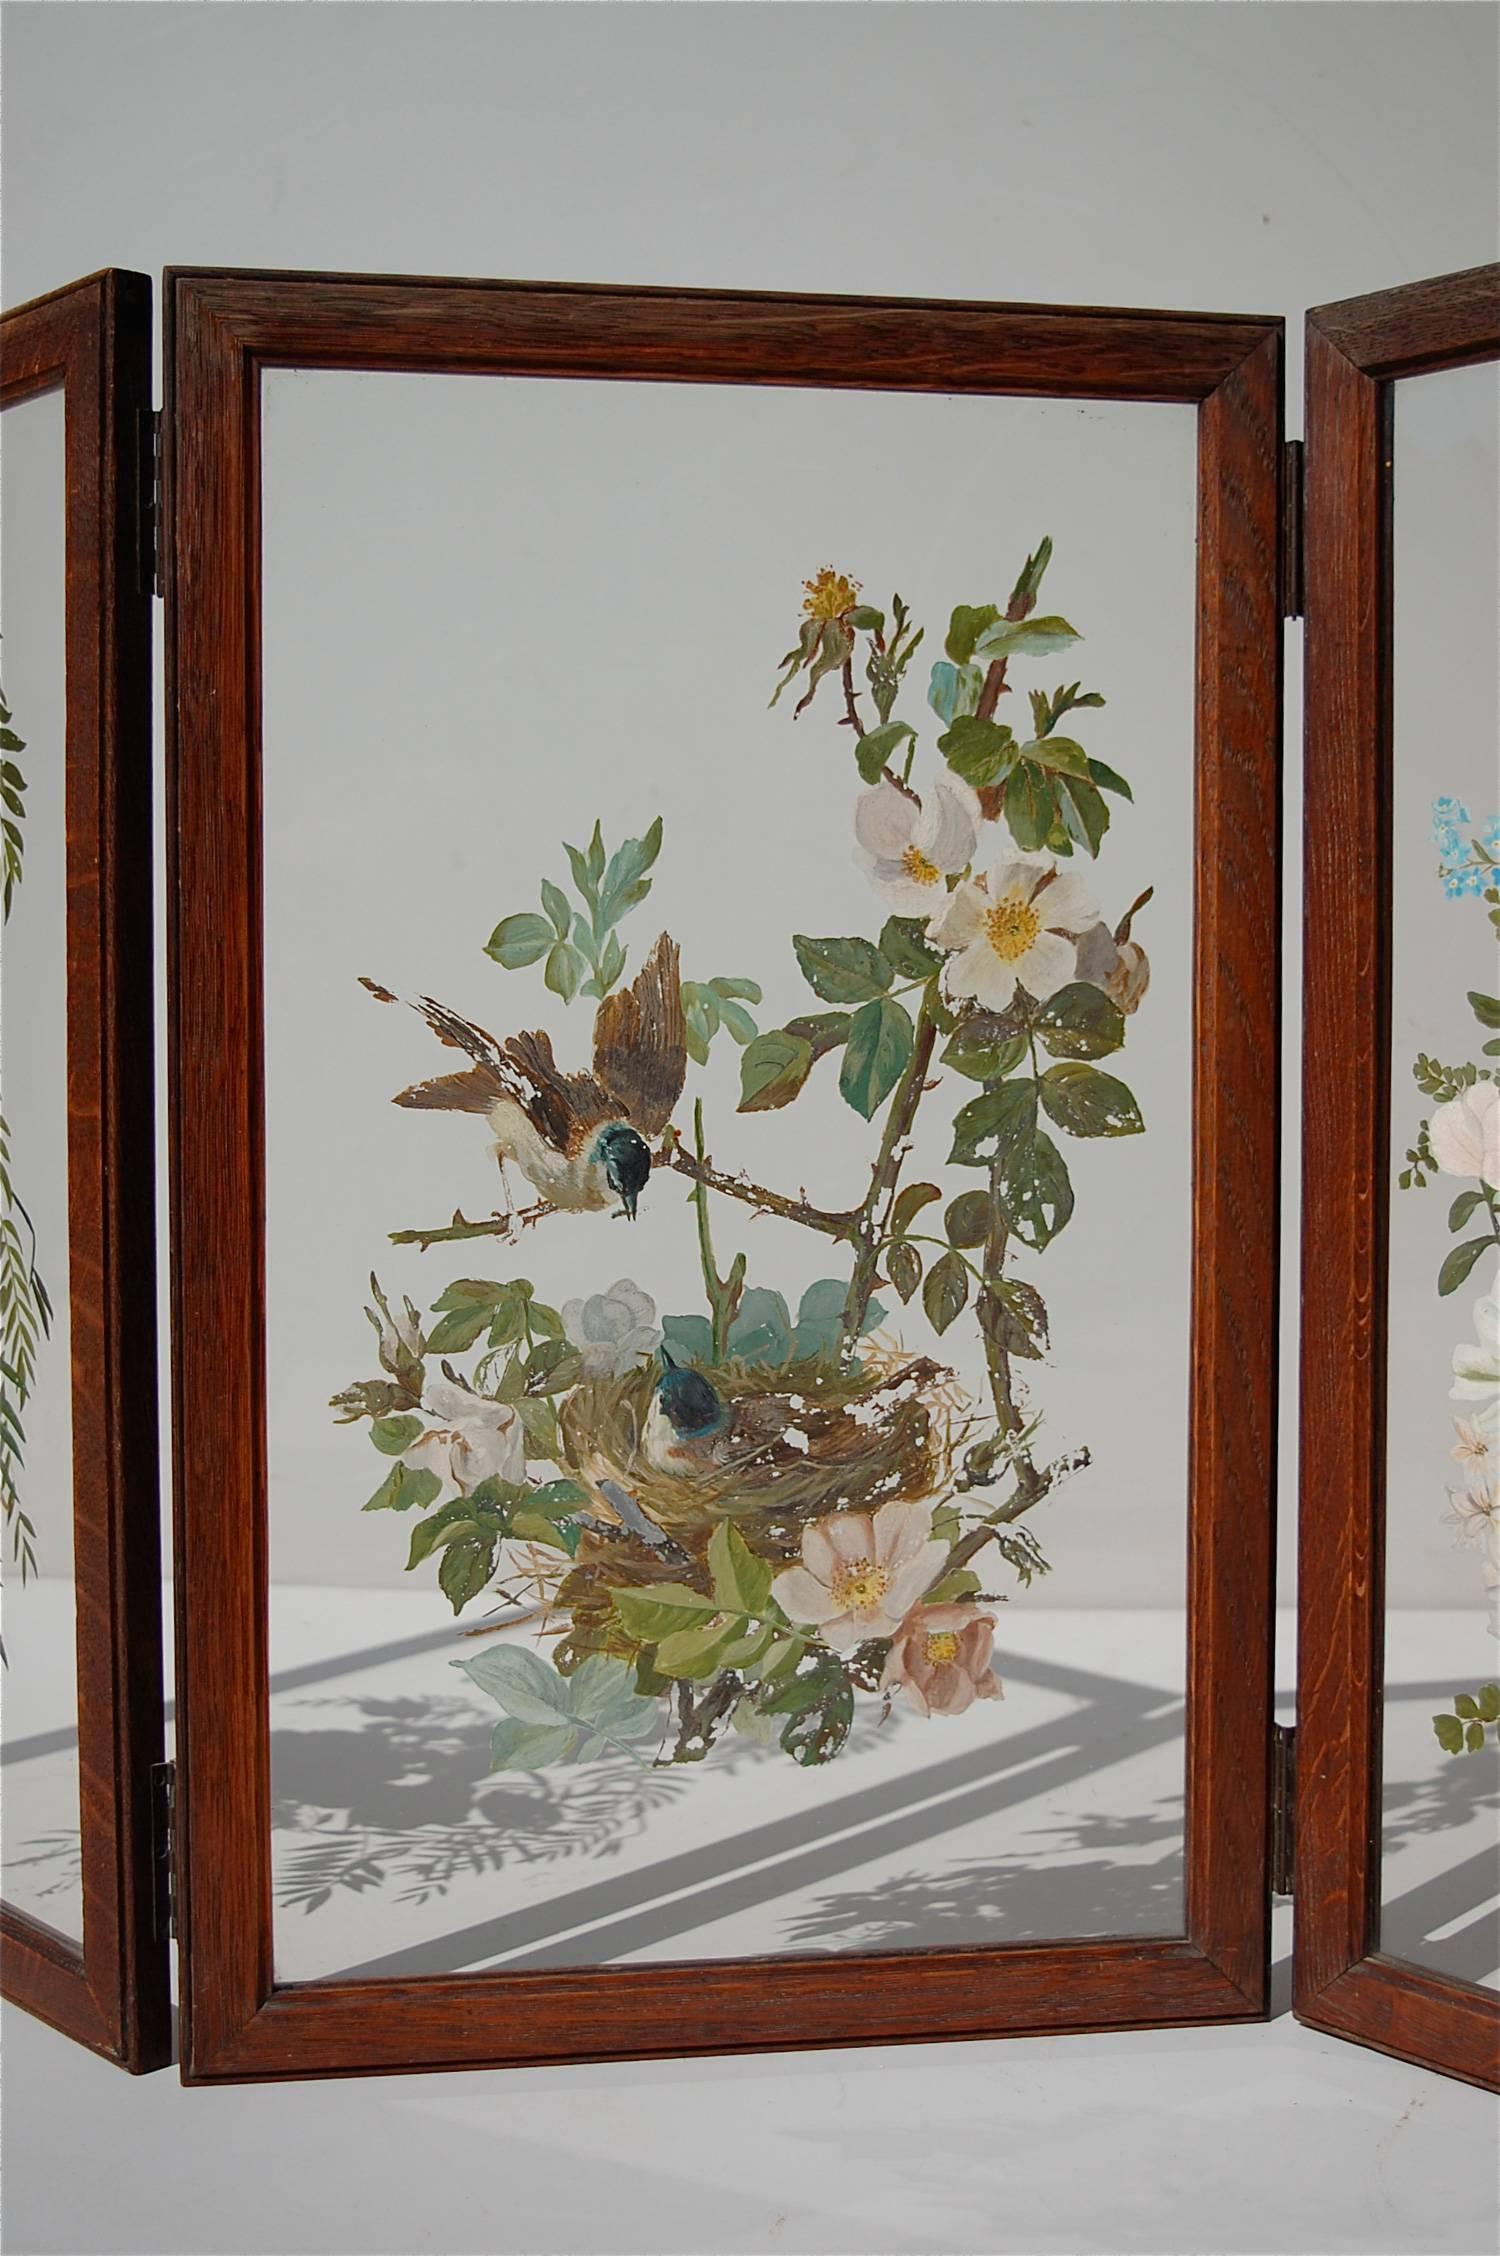 Aesthetic Movement Hand-Painted Folding Glass Table Screen or Divider, 1940s Belgium